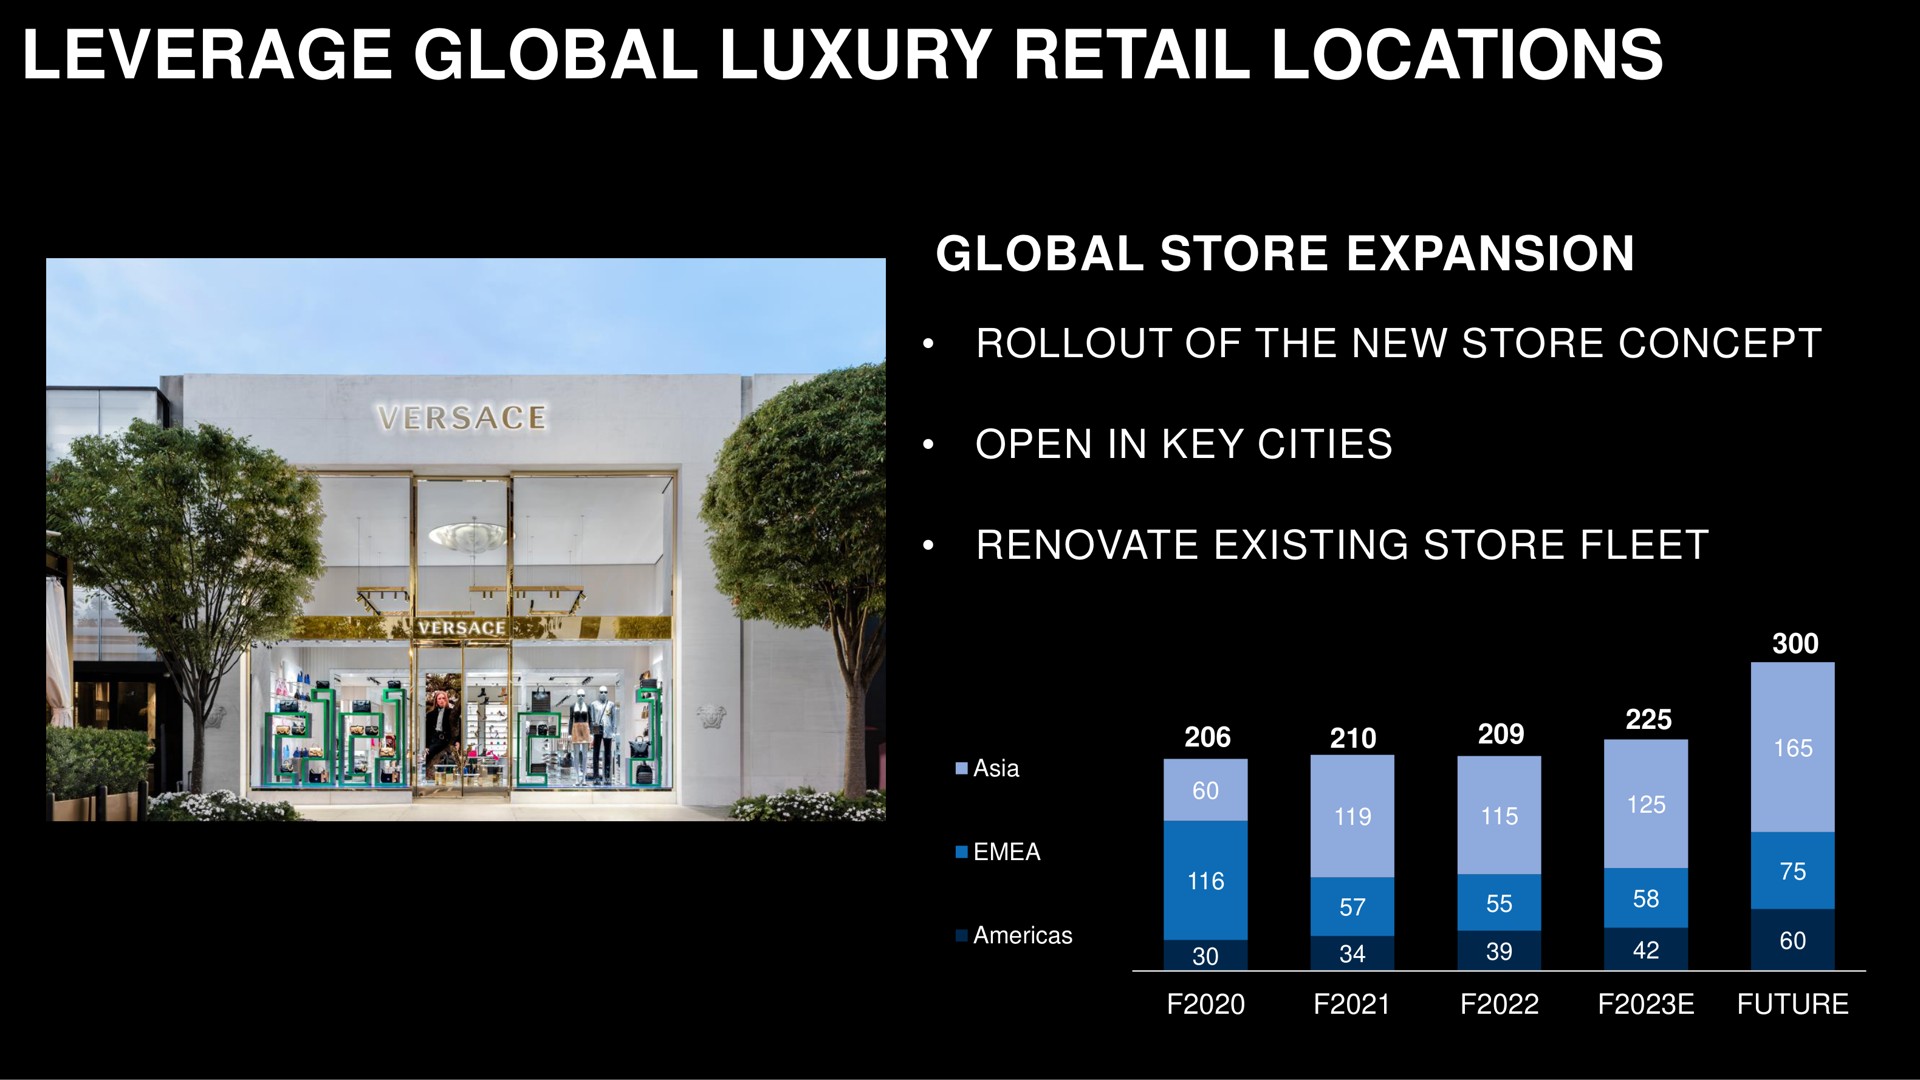 leverage global luxury retail locations store expansion of the new store concept open in key cities renovate existing store fleet pet tae sina a at as a a future | Capri Holdings